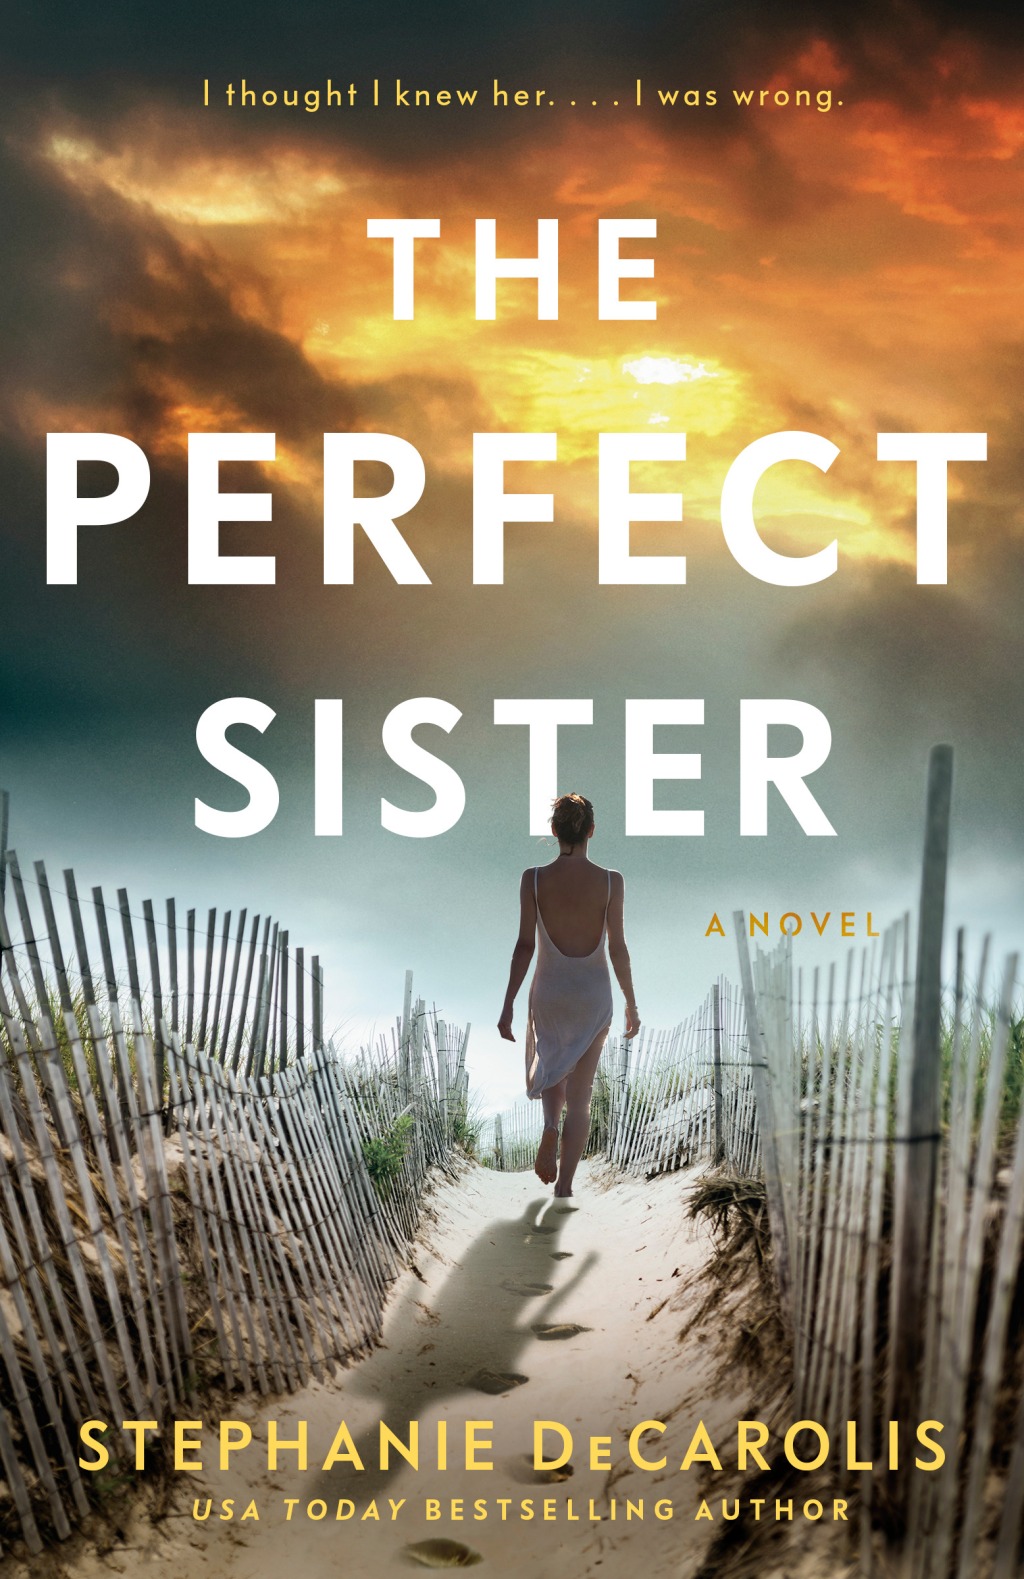 Reviewed: “The Perfect Sister” by Stephanie DeCarolis